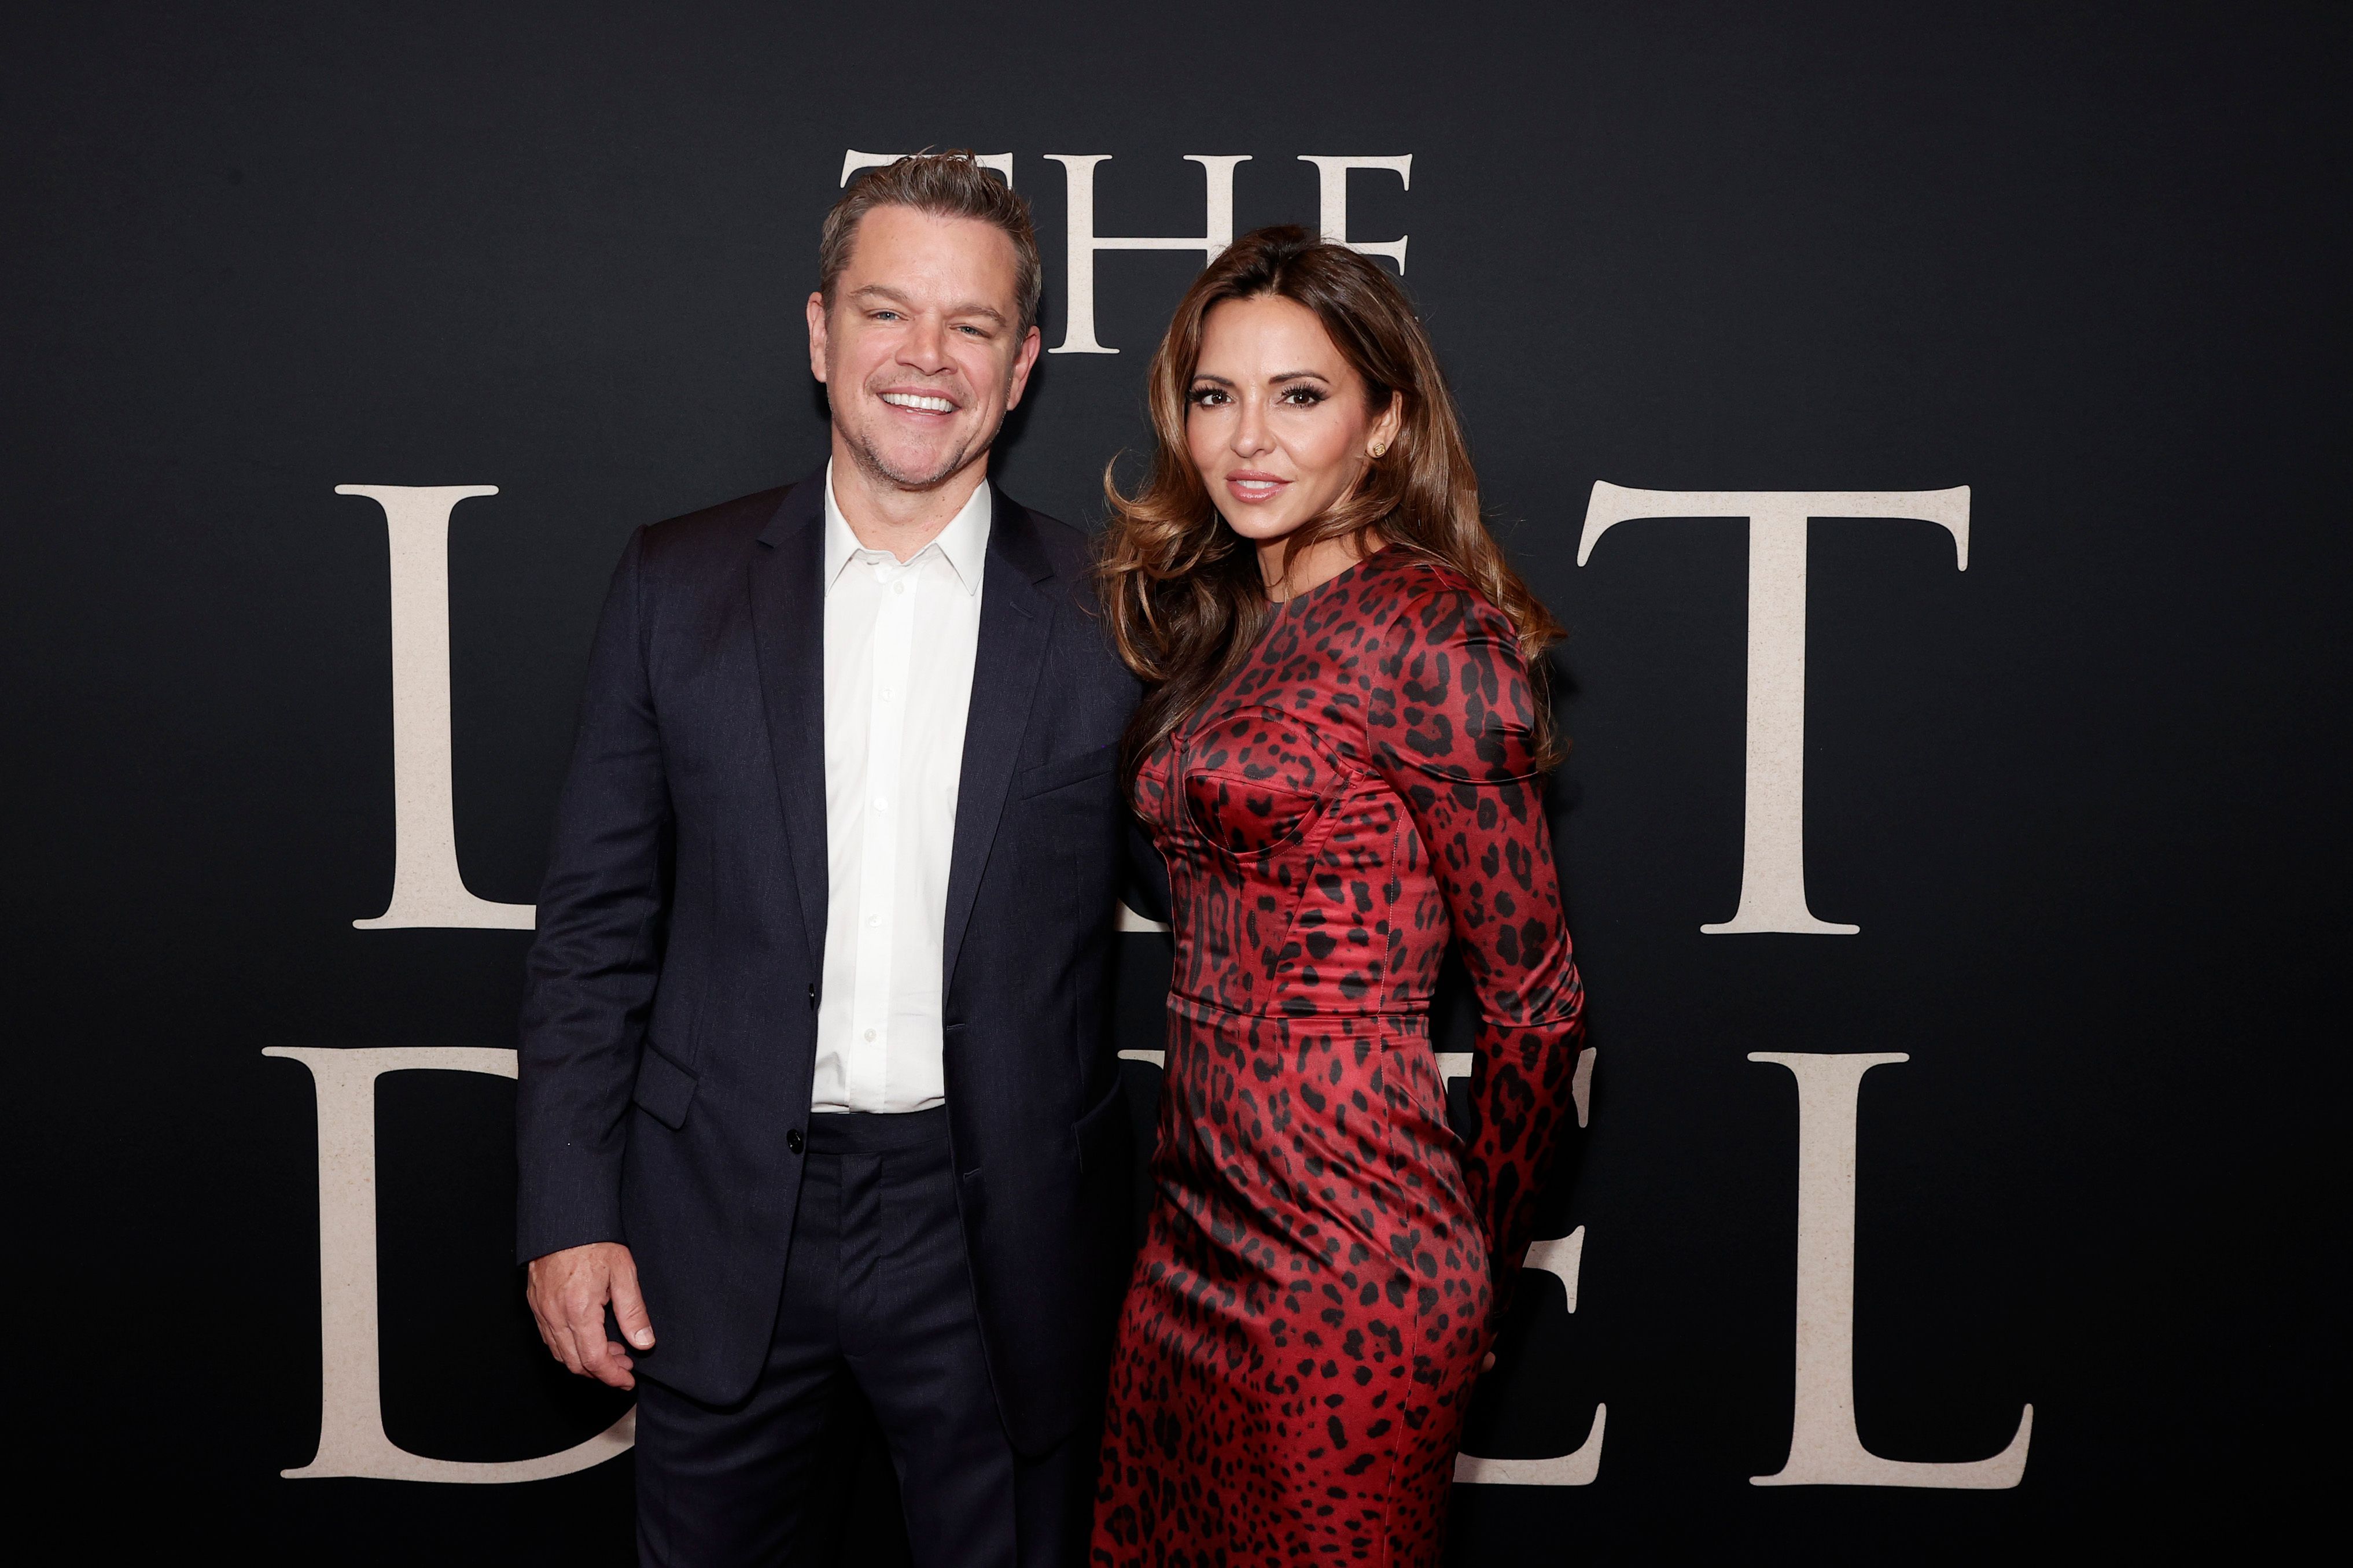 Matt Damon and Luciana Barroso at the "The Last Duel" New York premiere at Rose Theater at Jazz at Lincoln Center's Frederick P. Rose Hall on October 09, 2021 in New York City | Source: Getty Images